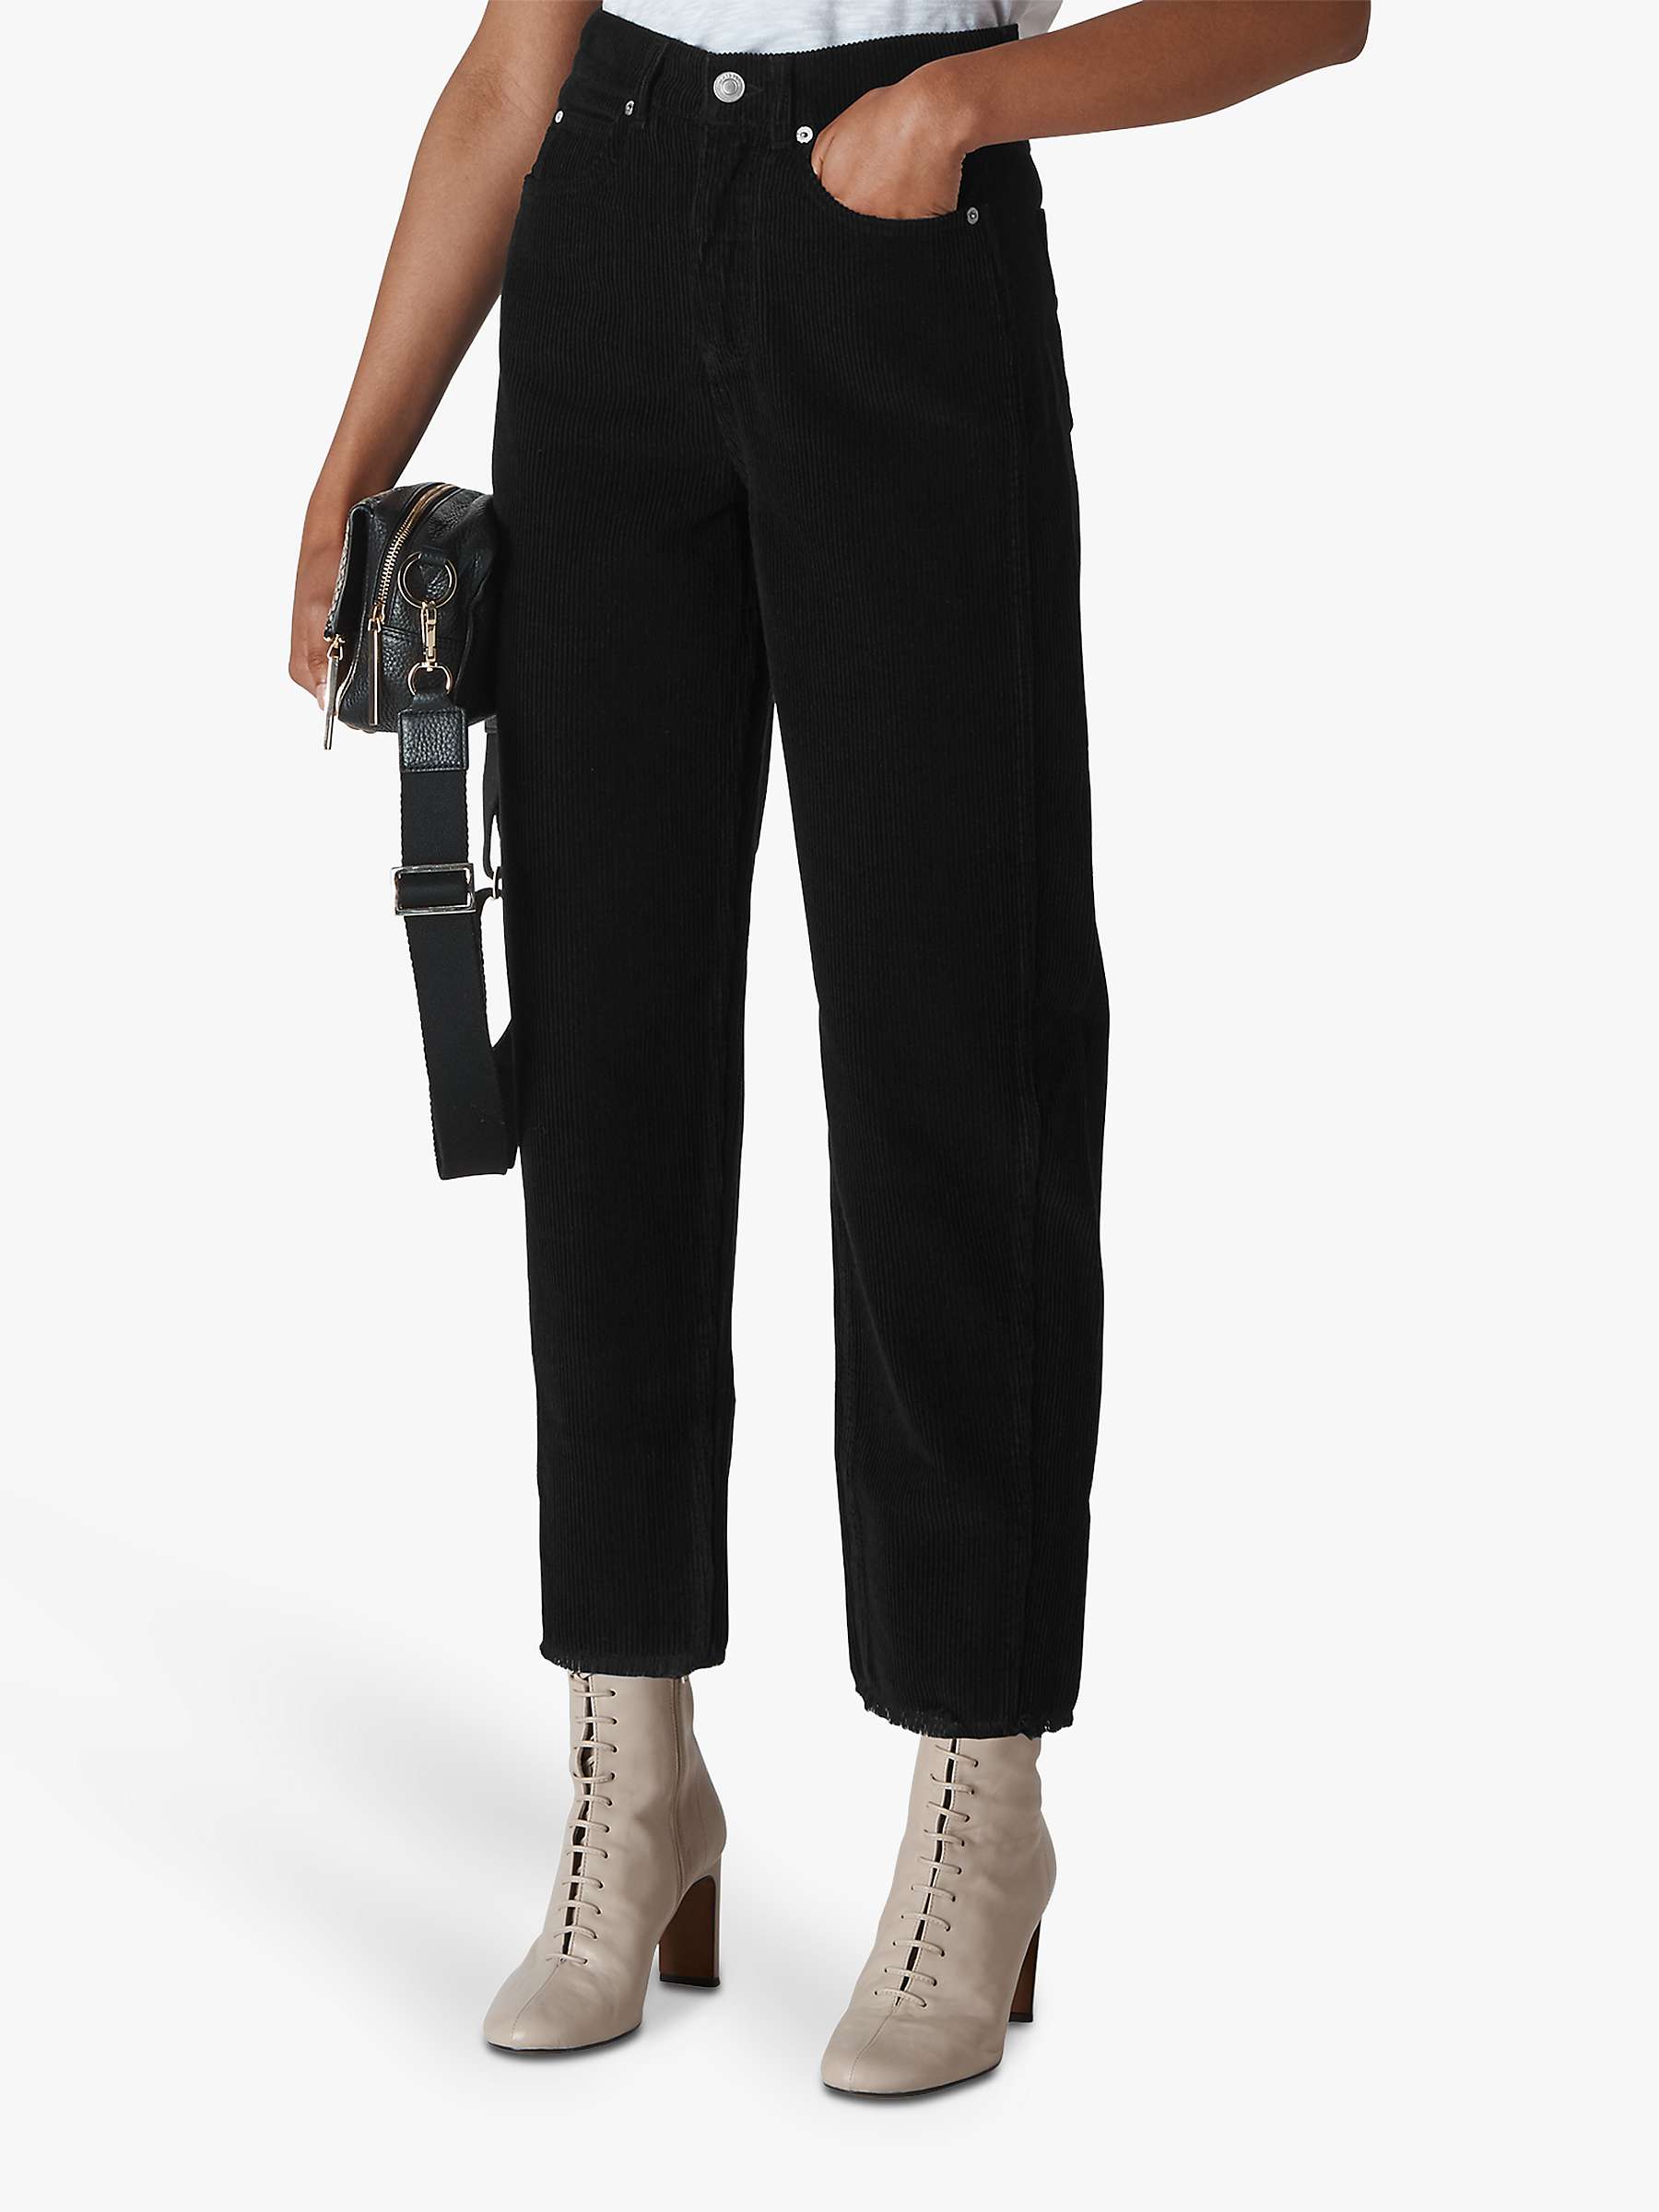 Buy Whistles High Waist Corduroy Trousers, Black Online at johnlewis.com